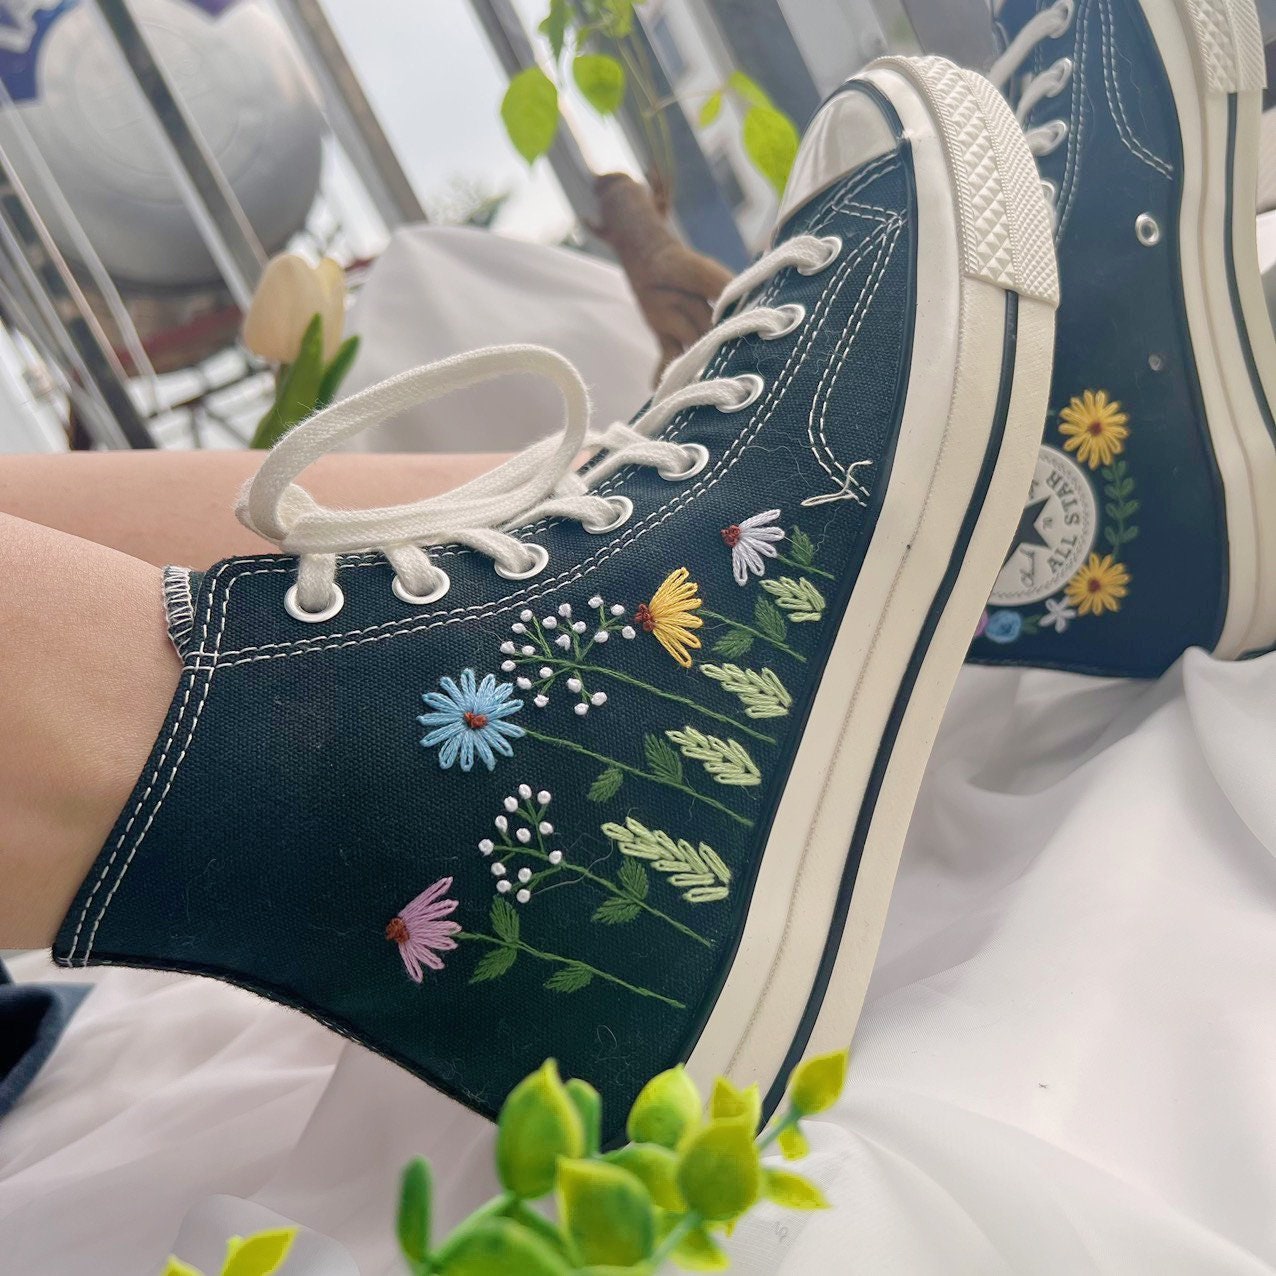 Embroidered Converse,Converse High Tops,Custom Colorful Chrysanthemum